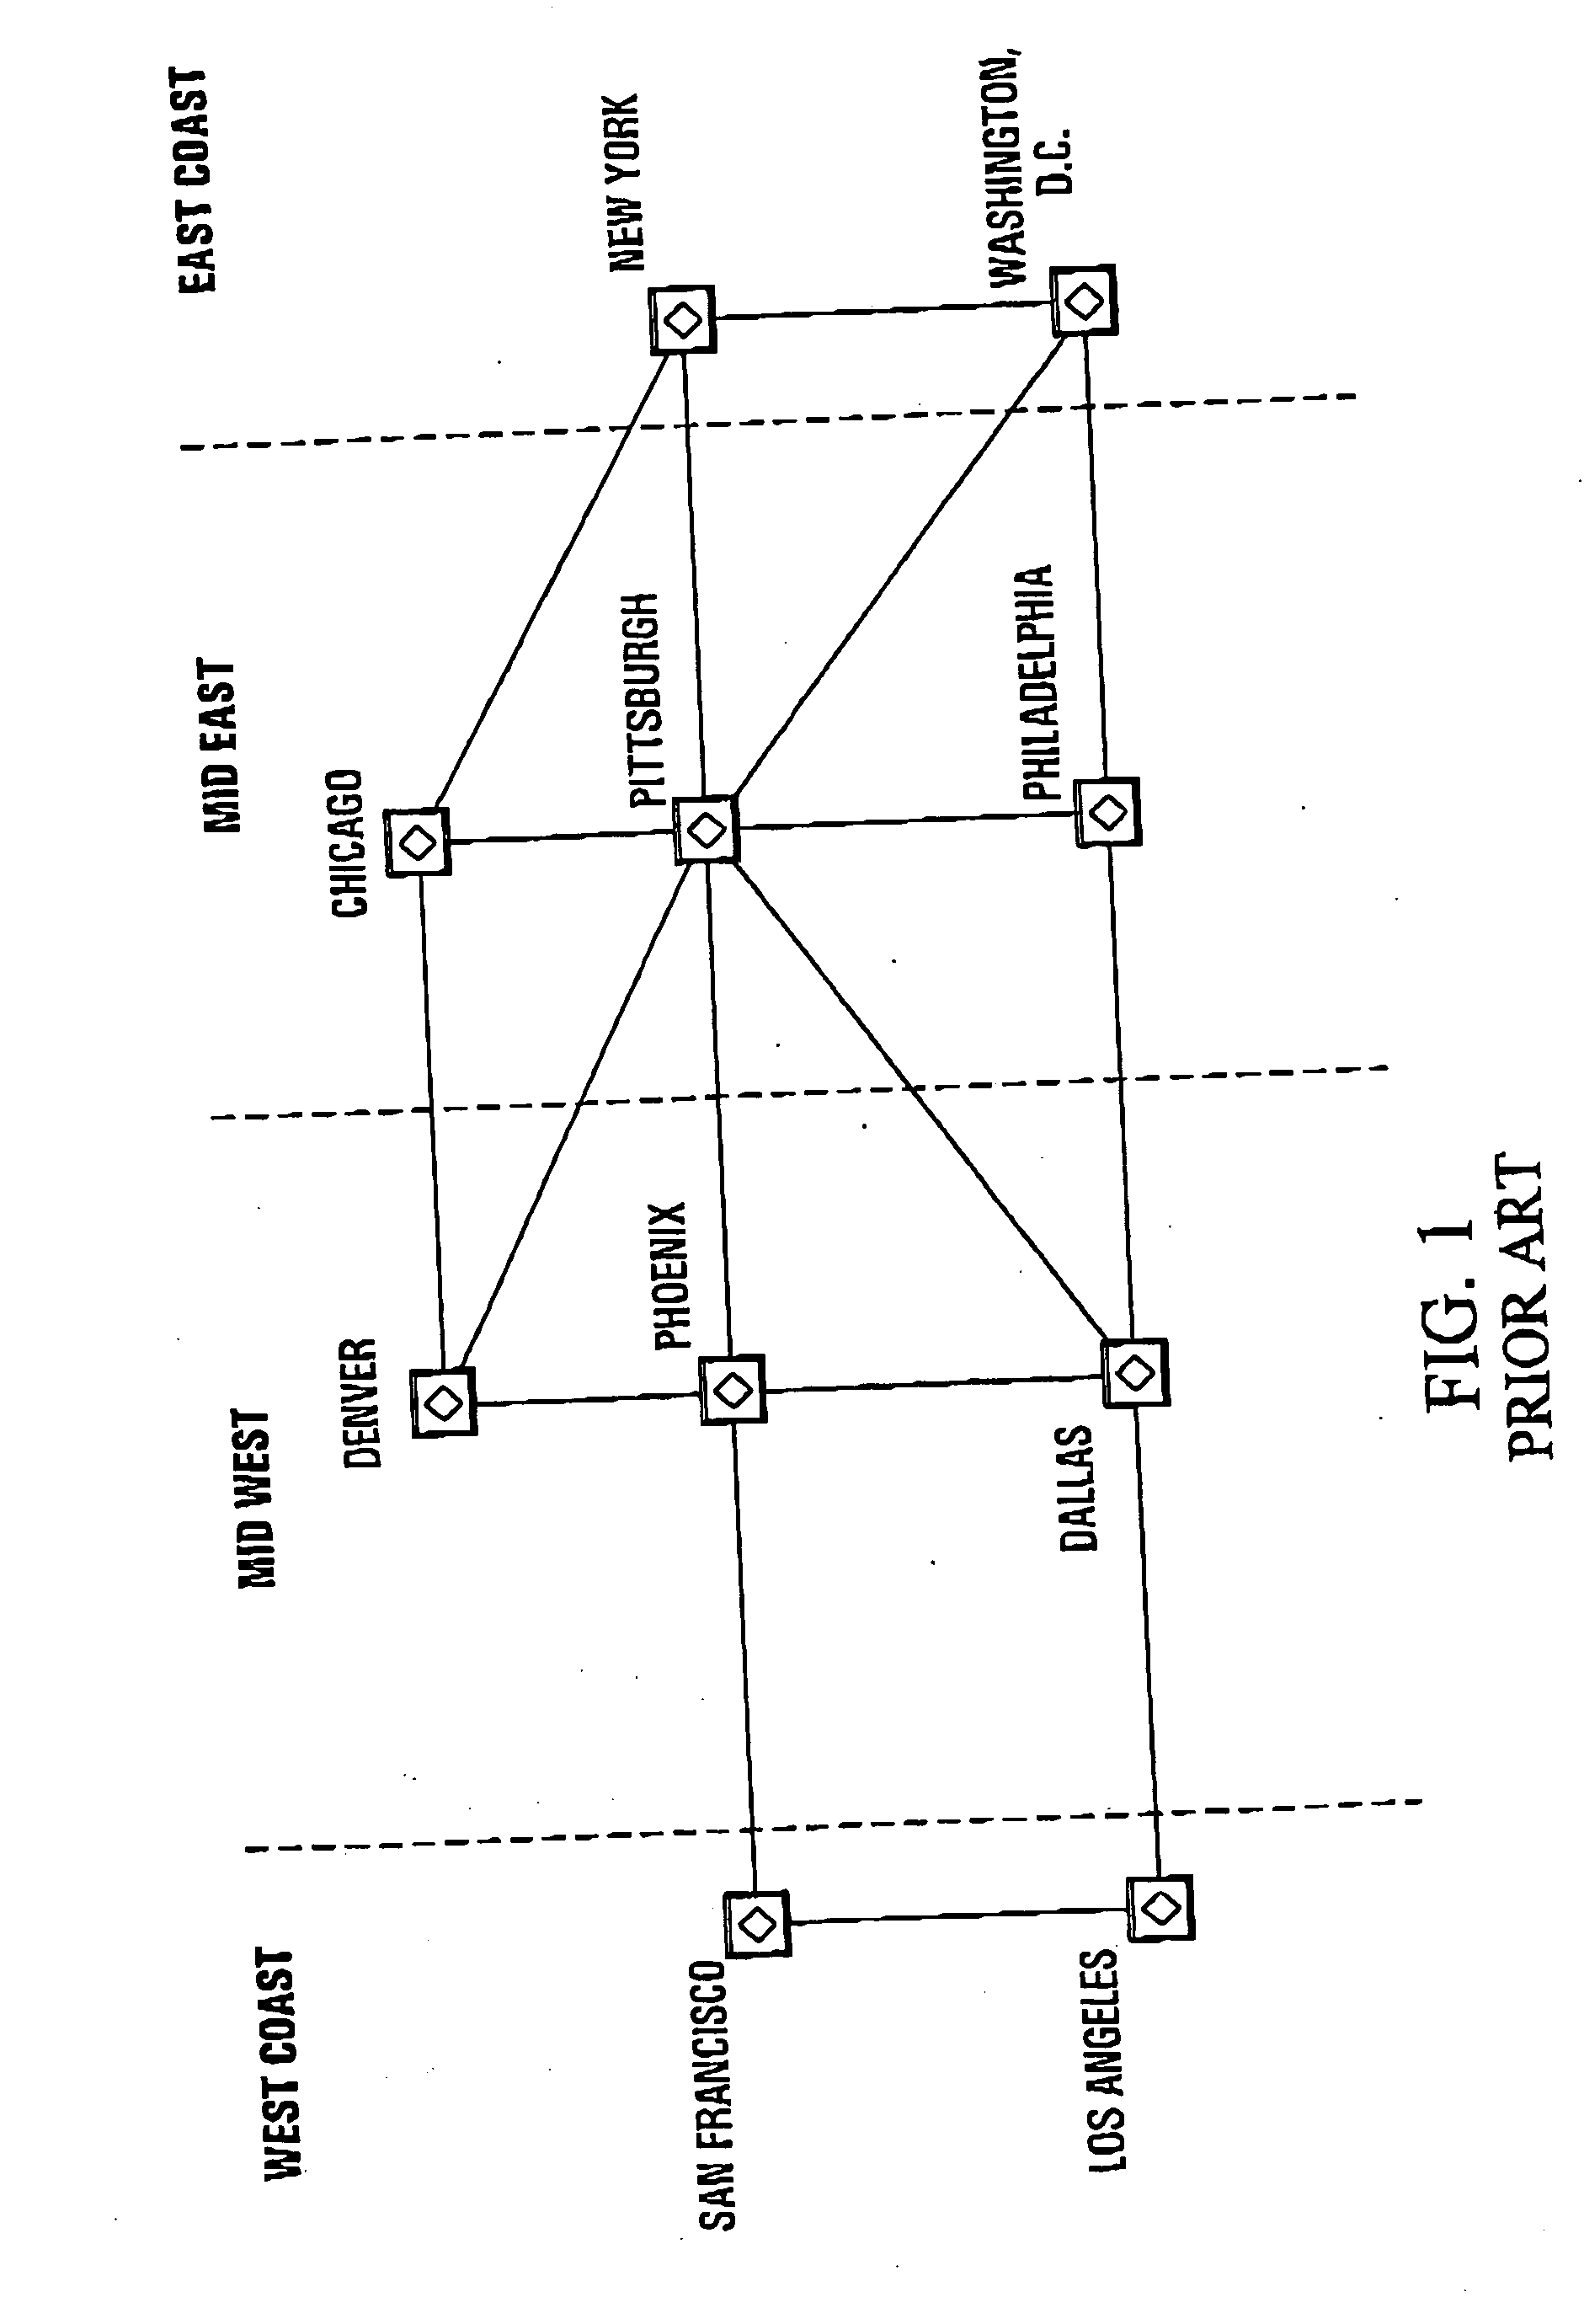 Method of displaying nodes and links